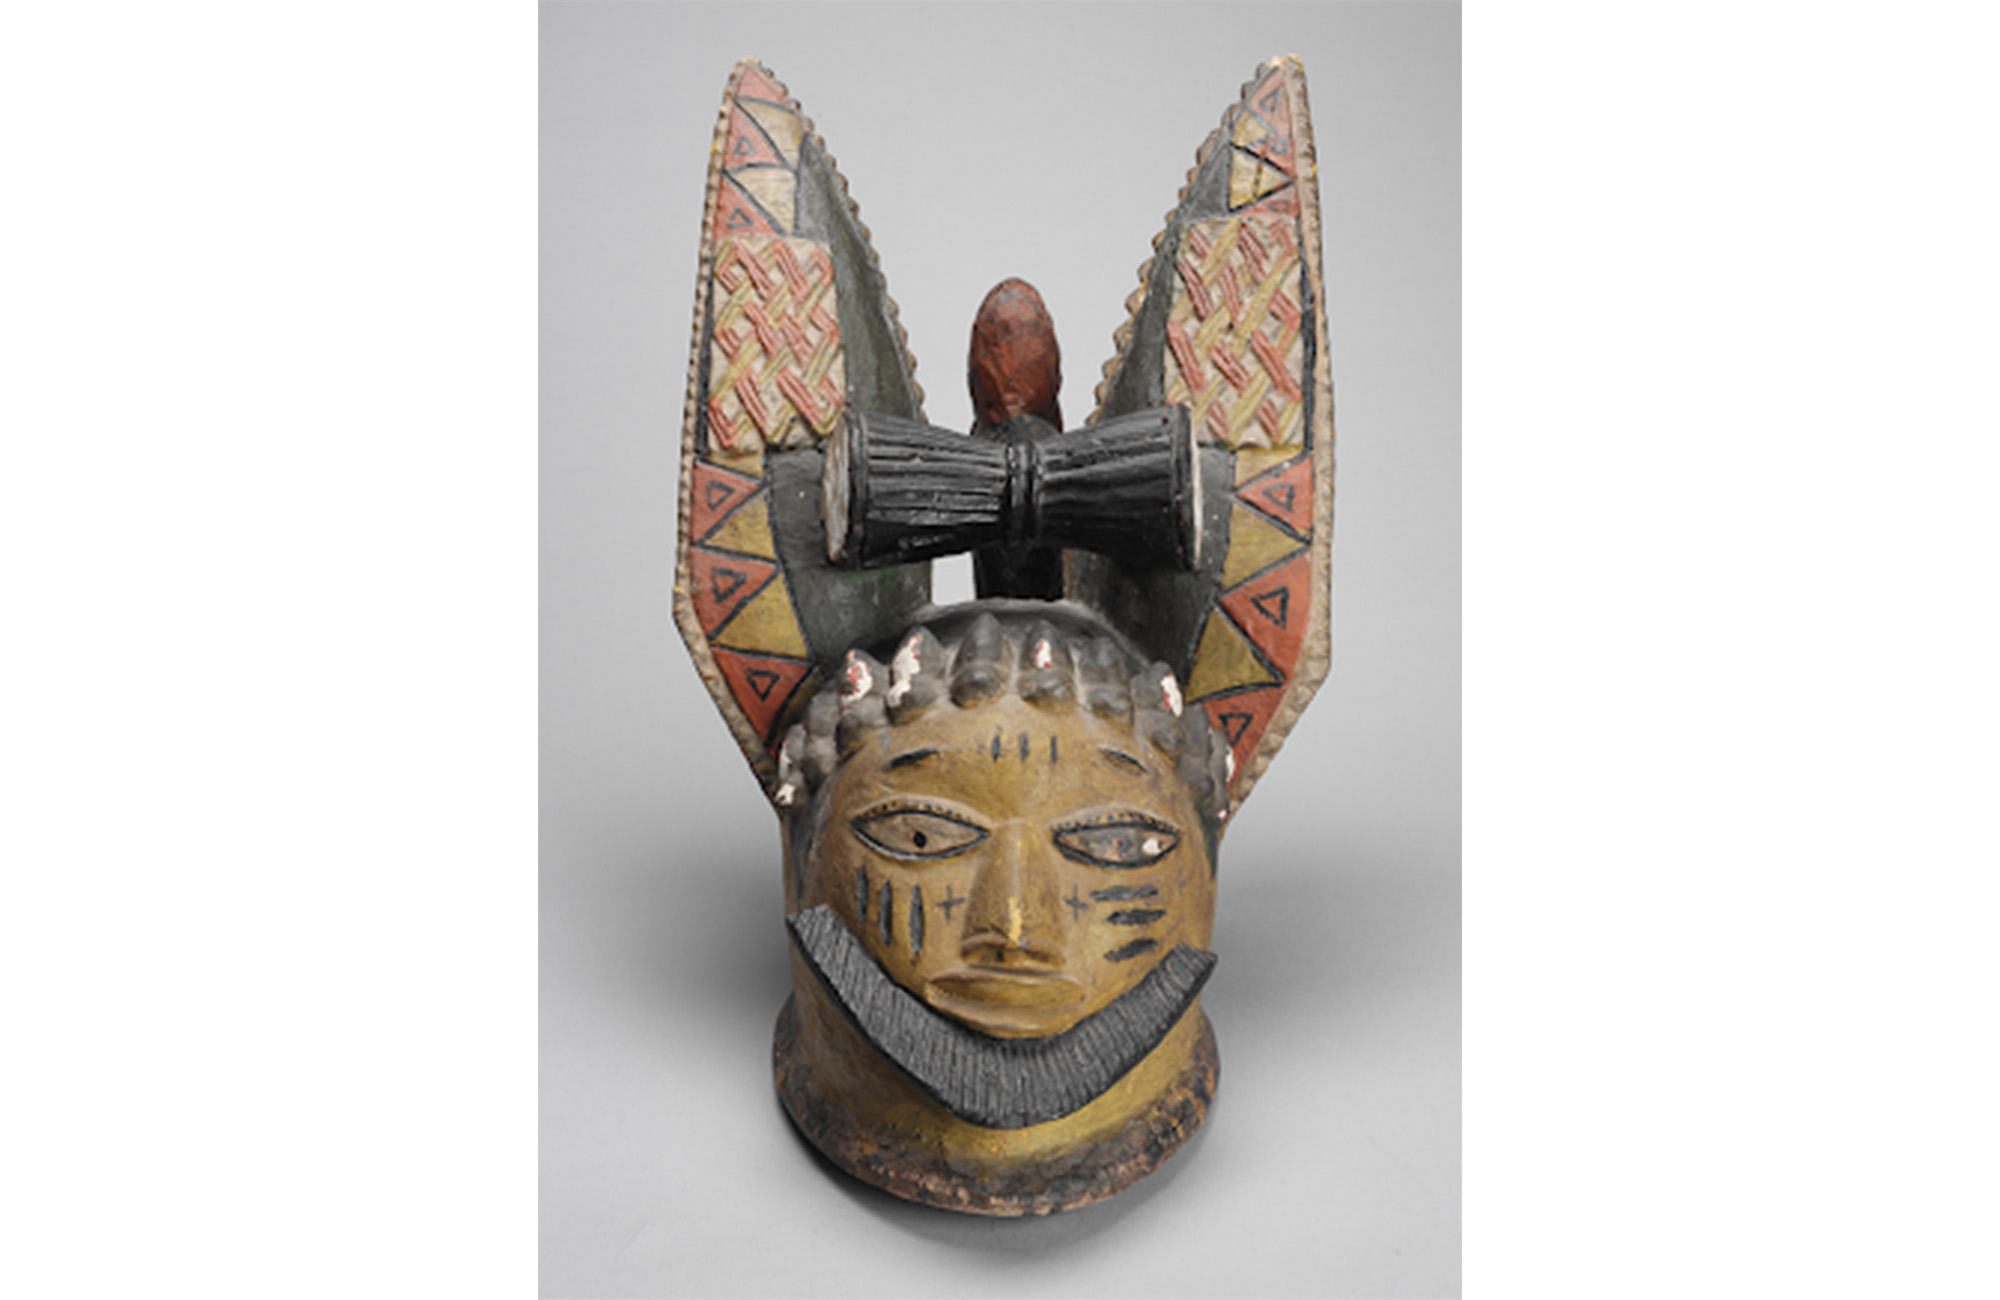 This exhibition explores a small part of a much longer and more widespread tradition of carved and painted wood. Objects from different time periods and cultures are highlighted on other floors of the museum.  The Egungun headdress is attributed to the Adugbologe atelier, a workshop that has produced Yoruba sculptures to serve the ritual needs of local patrons since the 19th century. In the early 20th century, the workshop expanded its market to create similar works for tourists and expatriates. This headdr